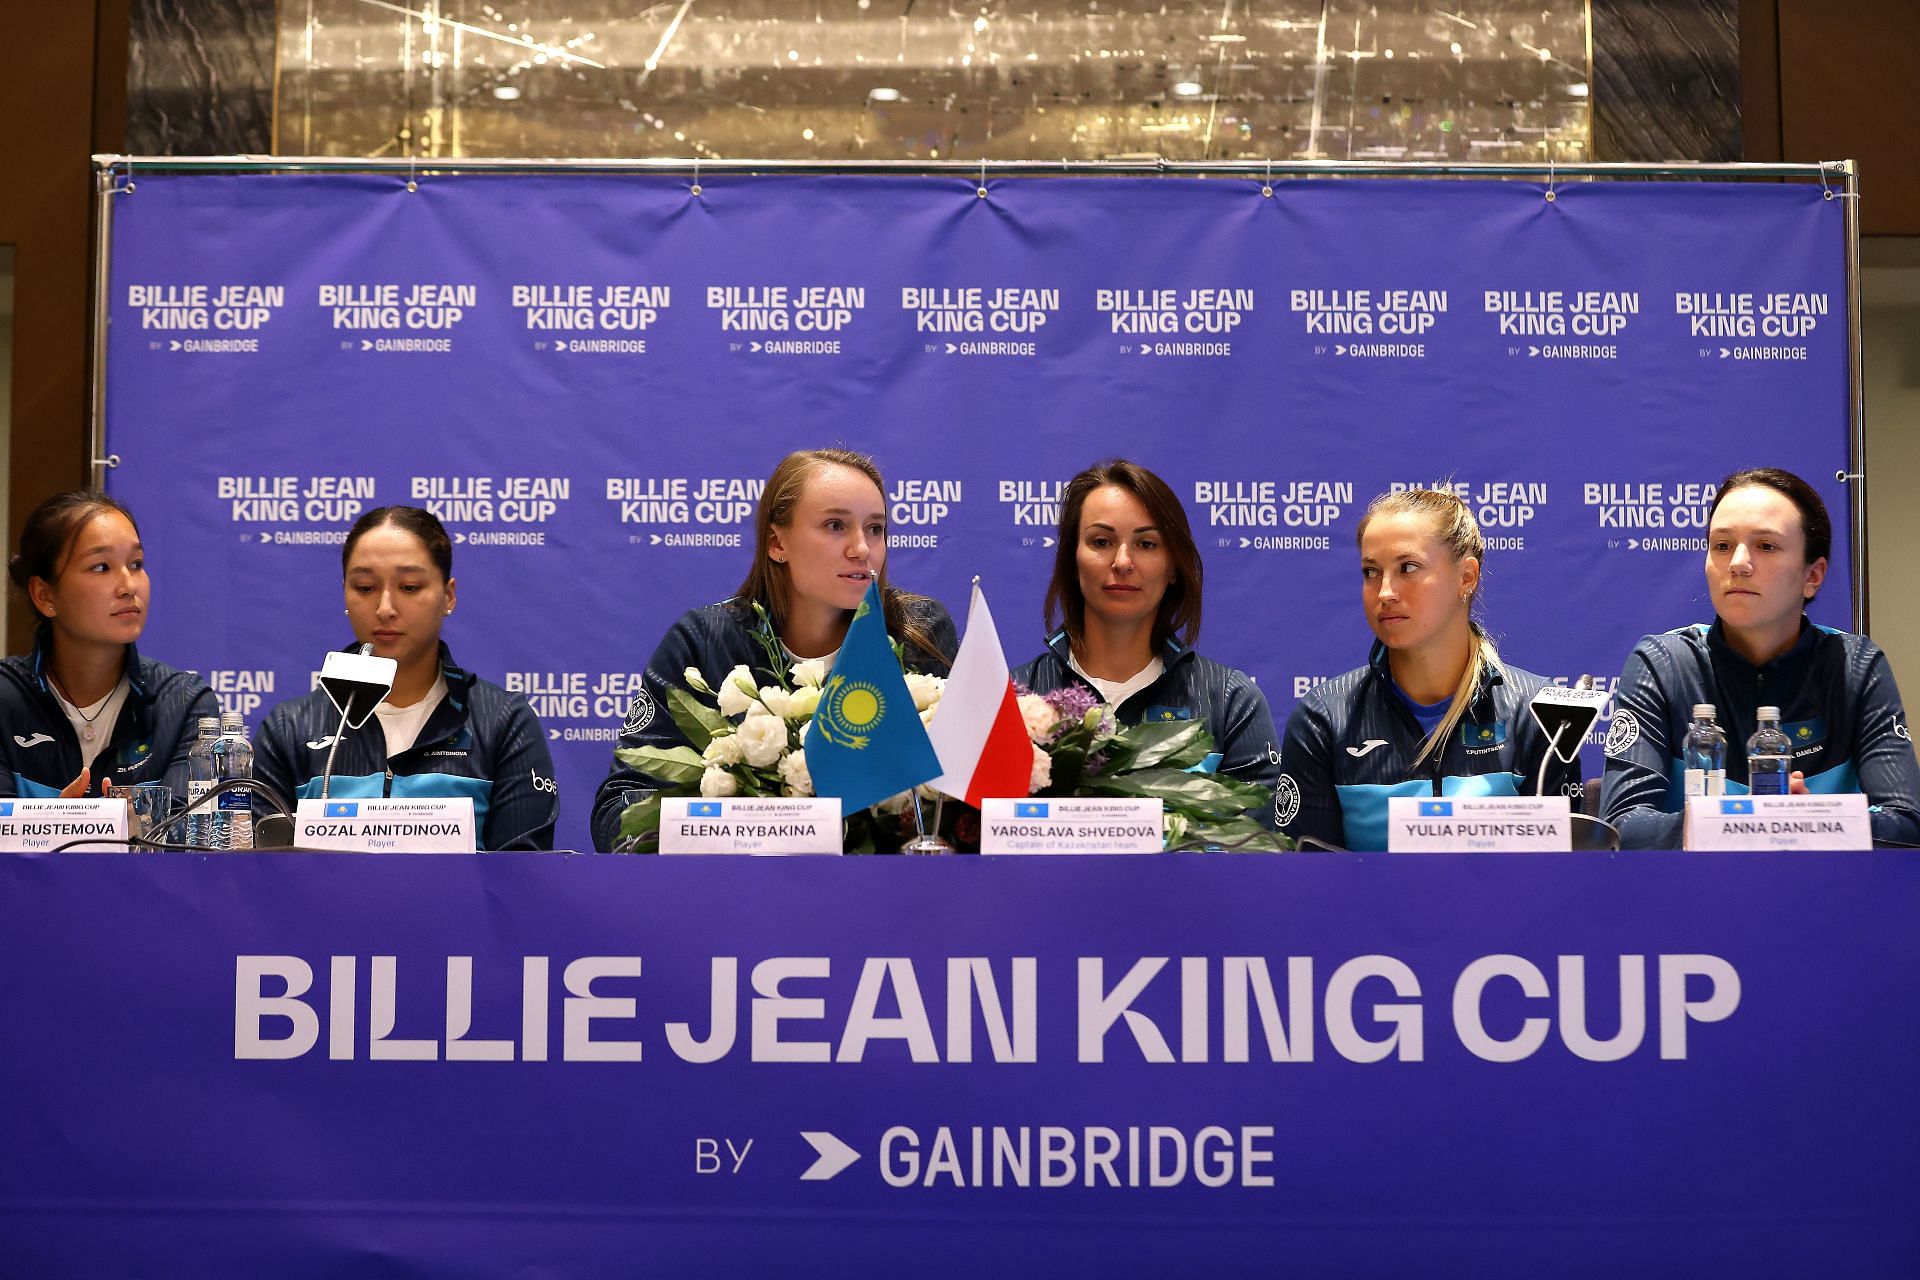 Elena Rybakina, Yaroslava Shvedova and other at the draw ceremony for the 2023 Billie Jean King Cup tie between Kazakhstan and Poland.